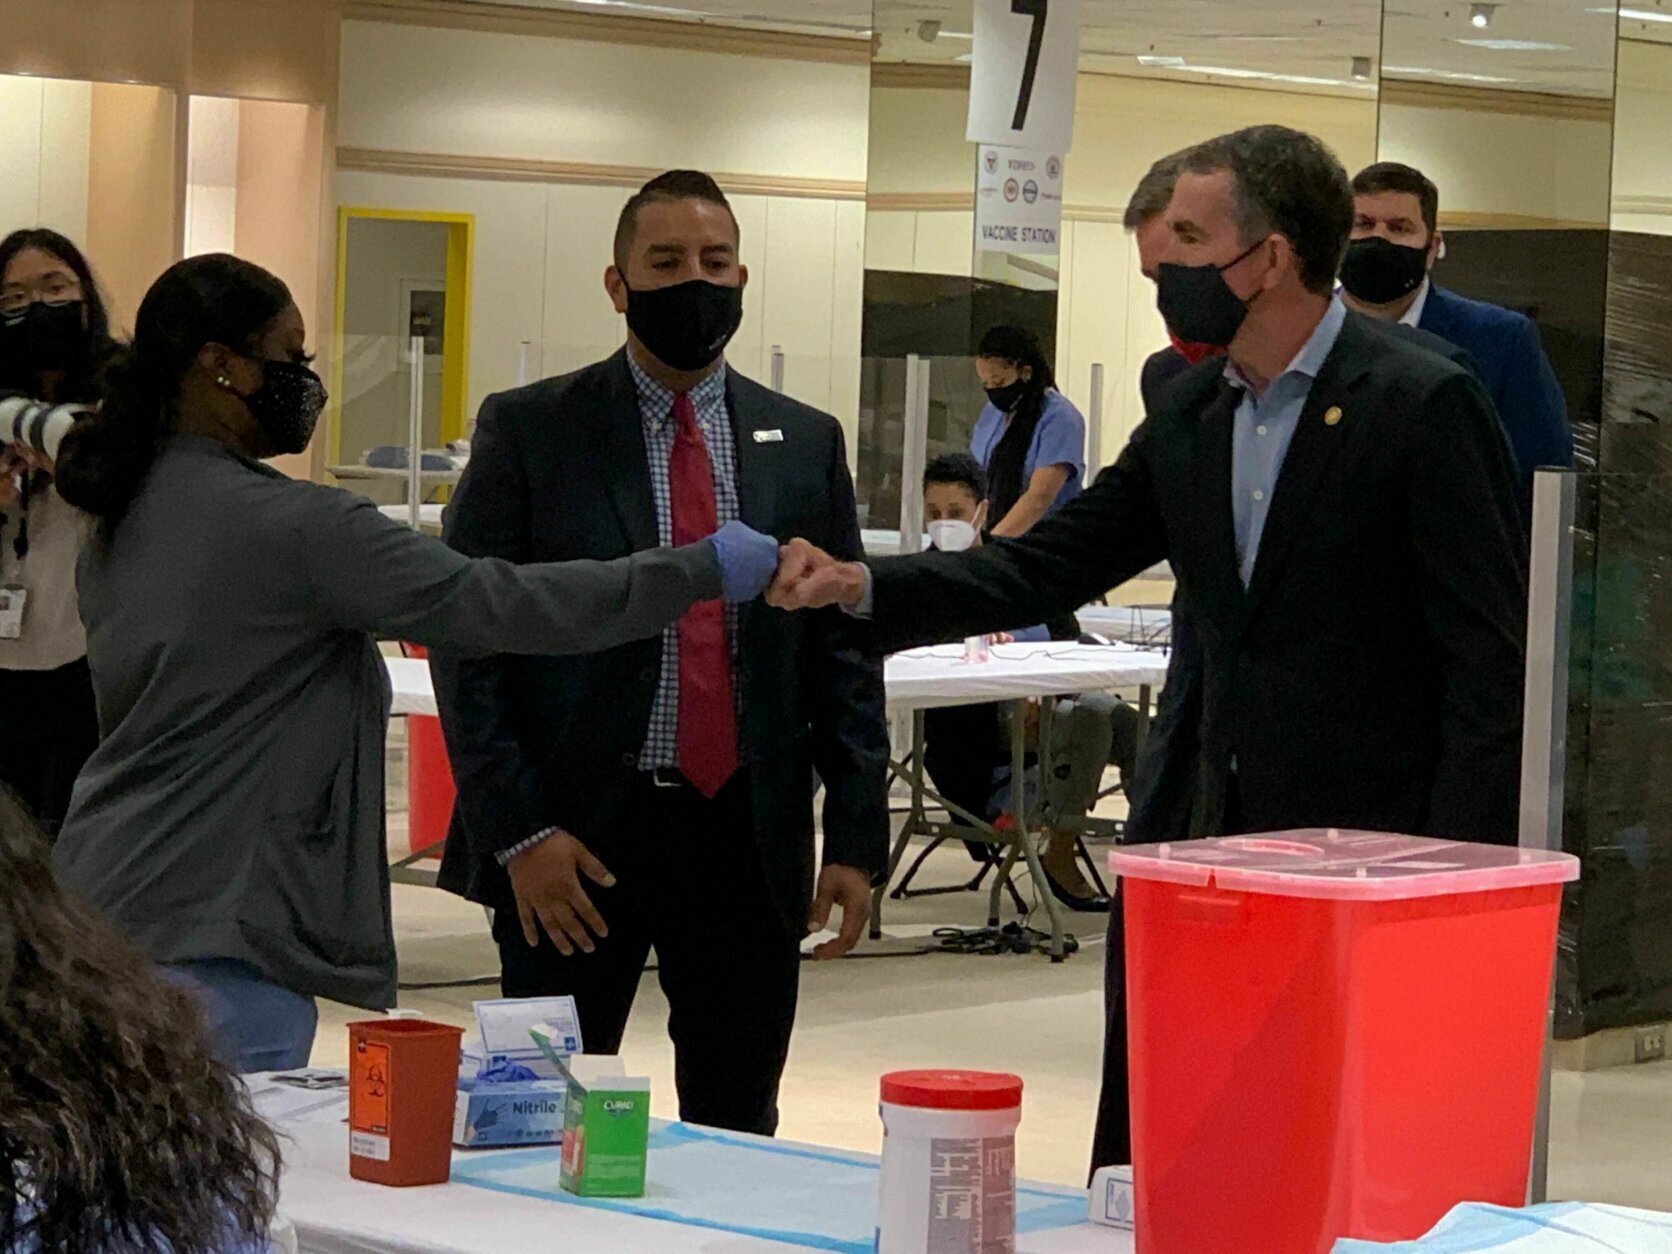 <p>Virginia Gov. Ralph Northam fist-bumps a nurse at the vaccination site during a tour on Monday. Northam was joined by Sen. Mark Warner.</p>
